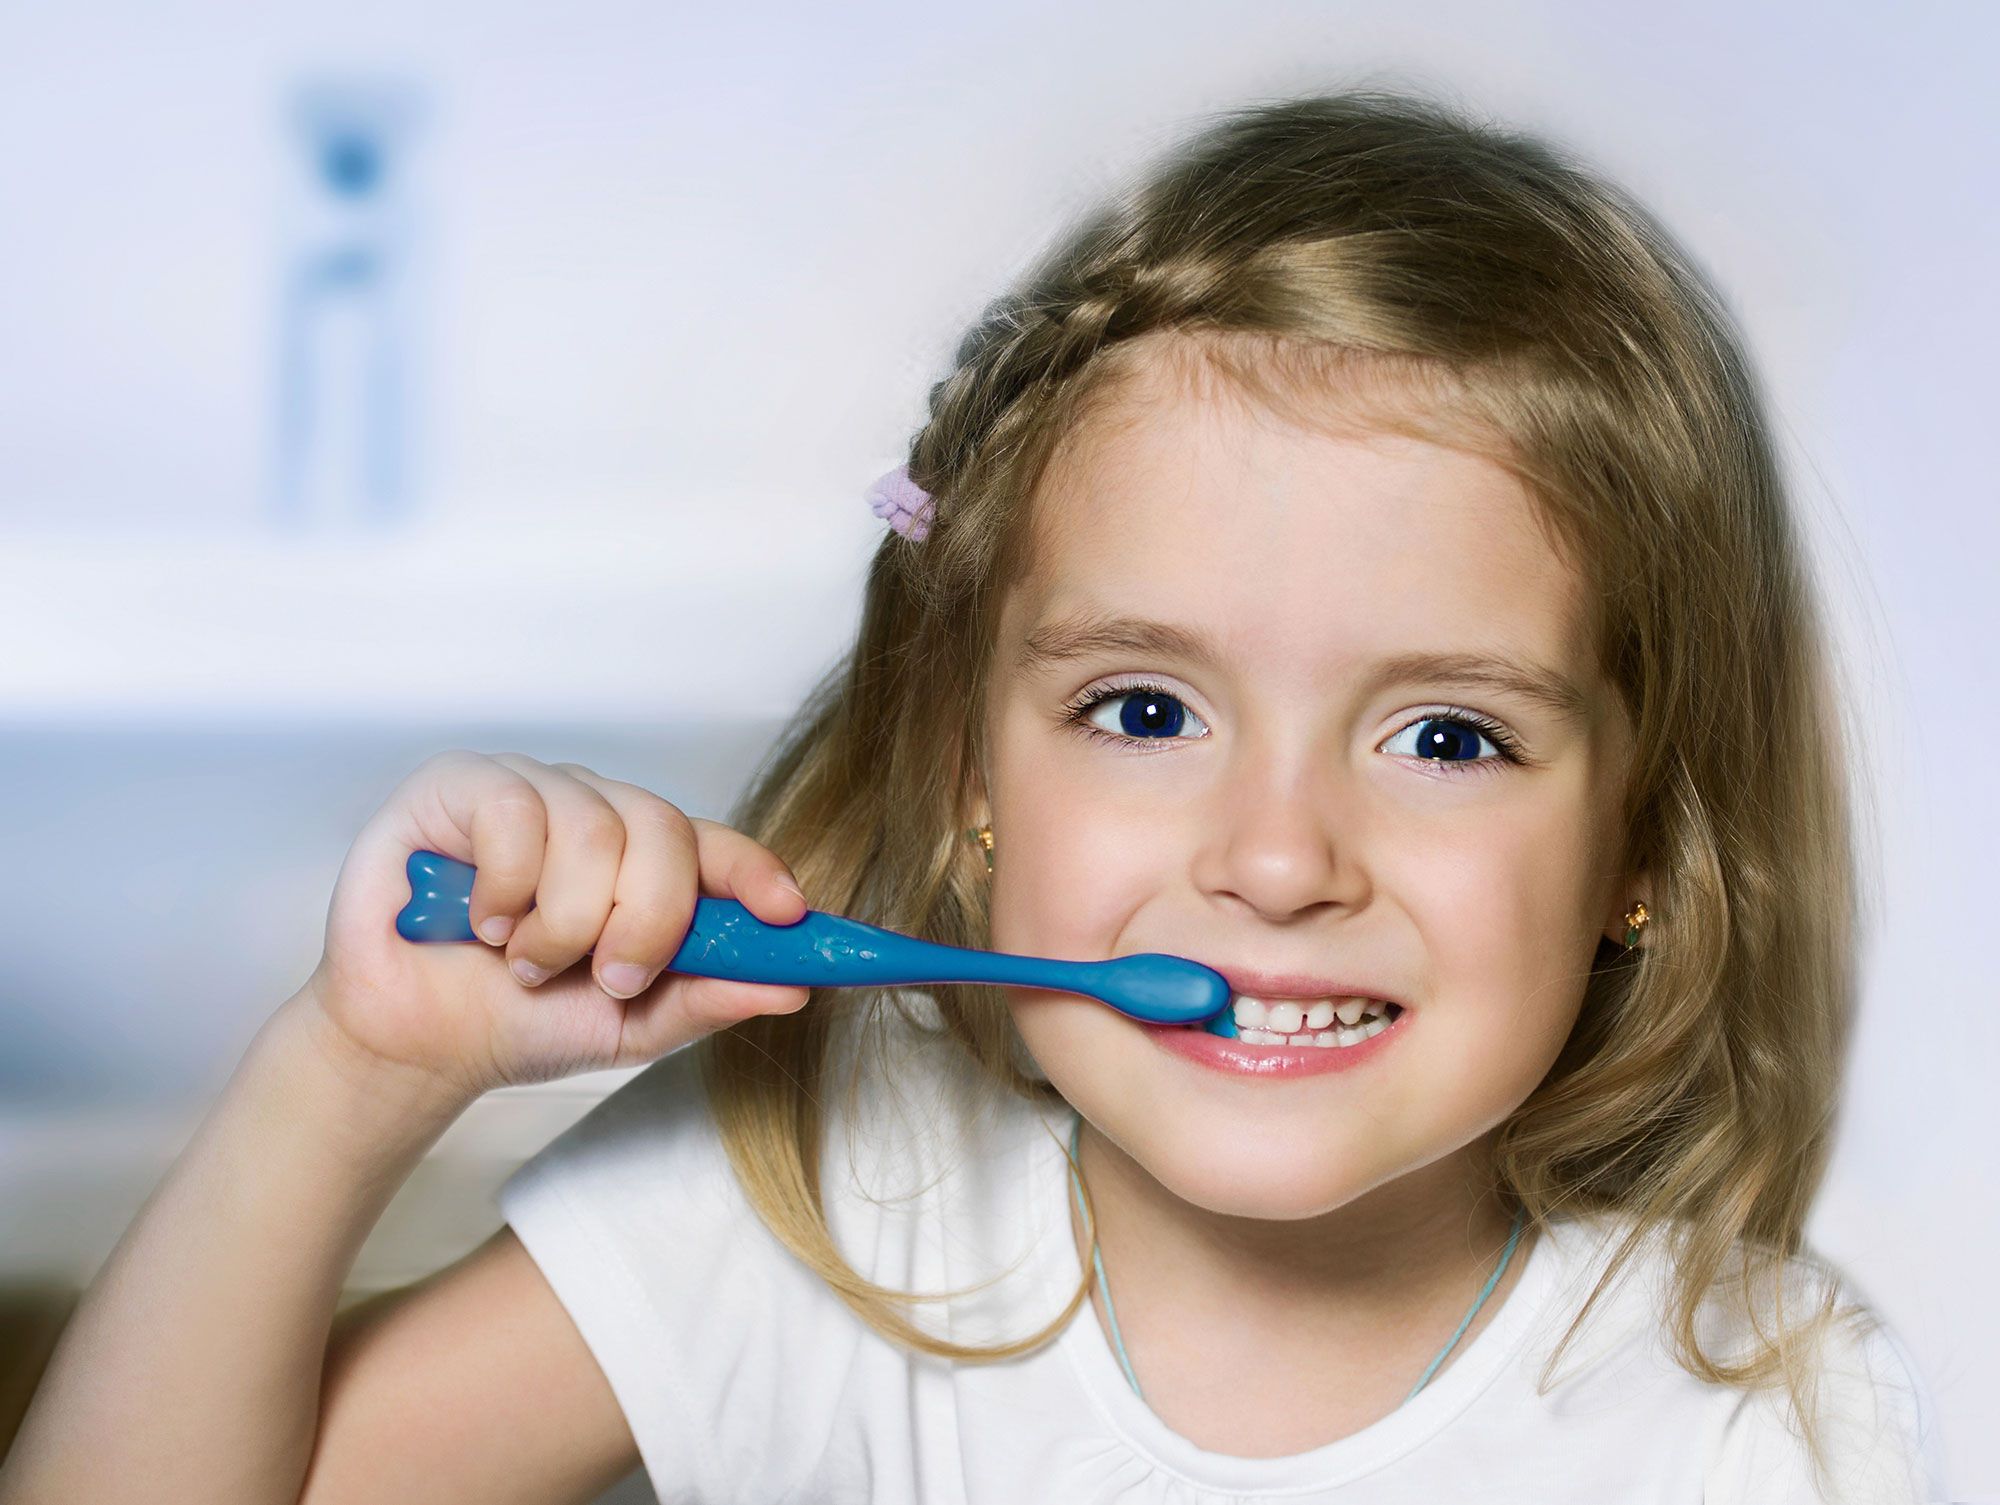 How Long Do You Need To Brush Your Teeth